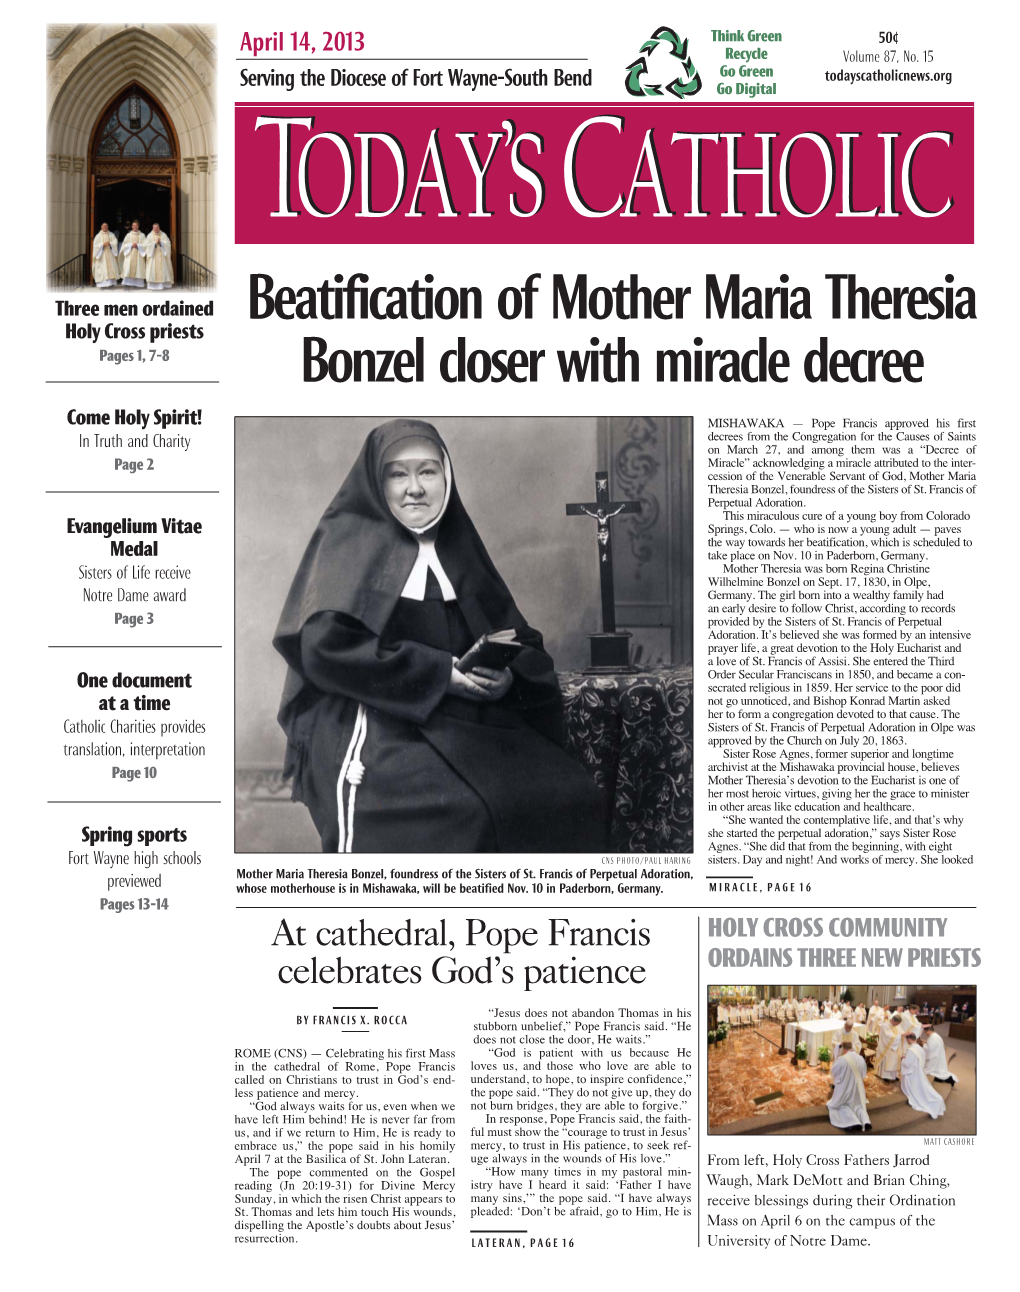 Beatification of Mother Maria Theresia Bonzel Closer with Miracle Decree